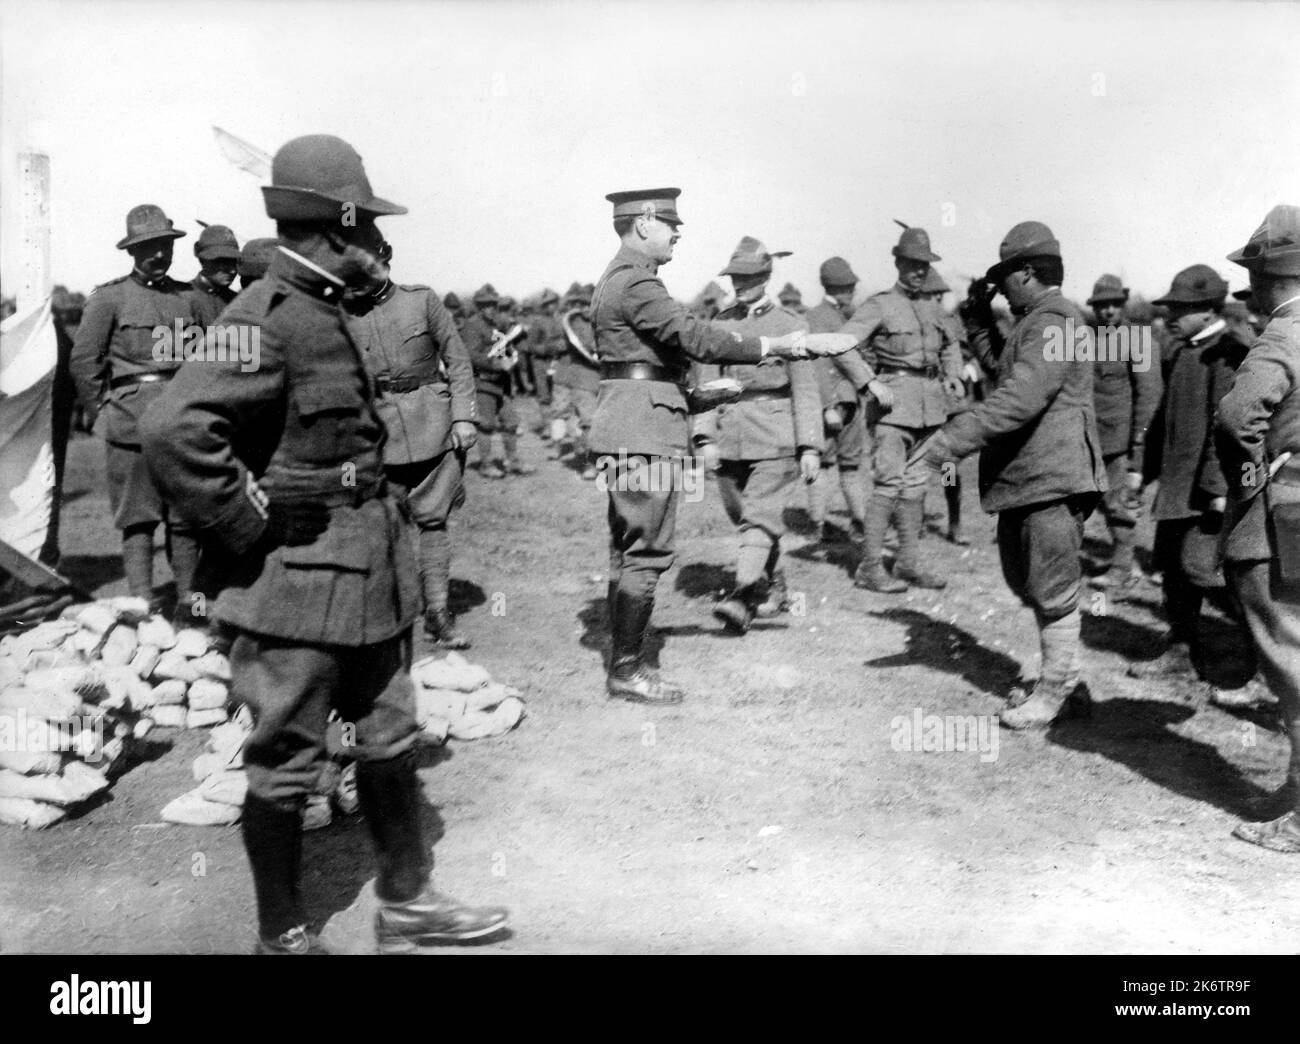 1918 , 30 july , ITALY: The italian military ALPINI  troups somewere in Italy during the distribution of gift to a regiment from the AMERICAN RED CROSS Officer . Unknown american photographer . - ALPINO - ALPINE - CROCE ROSSA - PRIMA  GUERRA MONDIALE - First World War - Great War - WWI - al FRONTE - miliari soldati italiani - COLONIALISMO - COLONIALISM - HISTORY - FOTO STORICHE ---  Archivio GBB Stock Photo